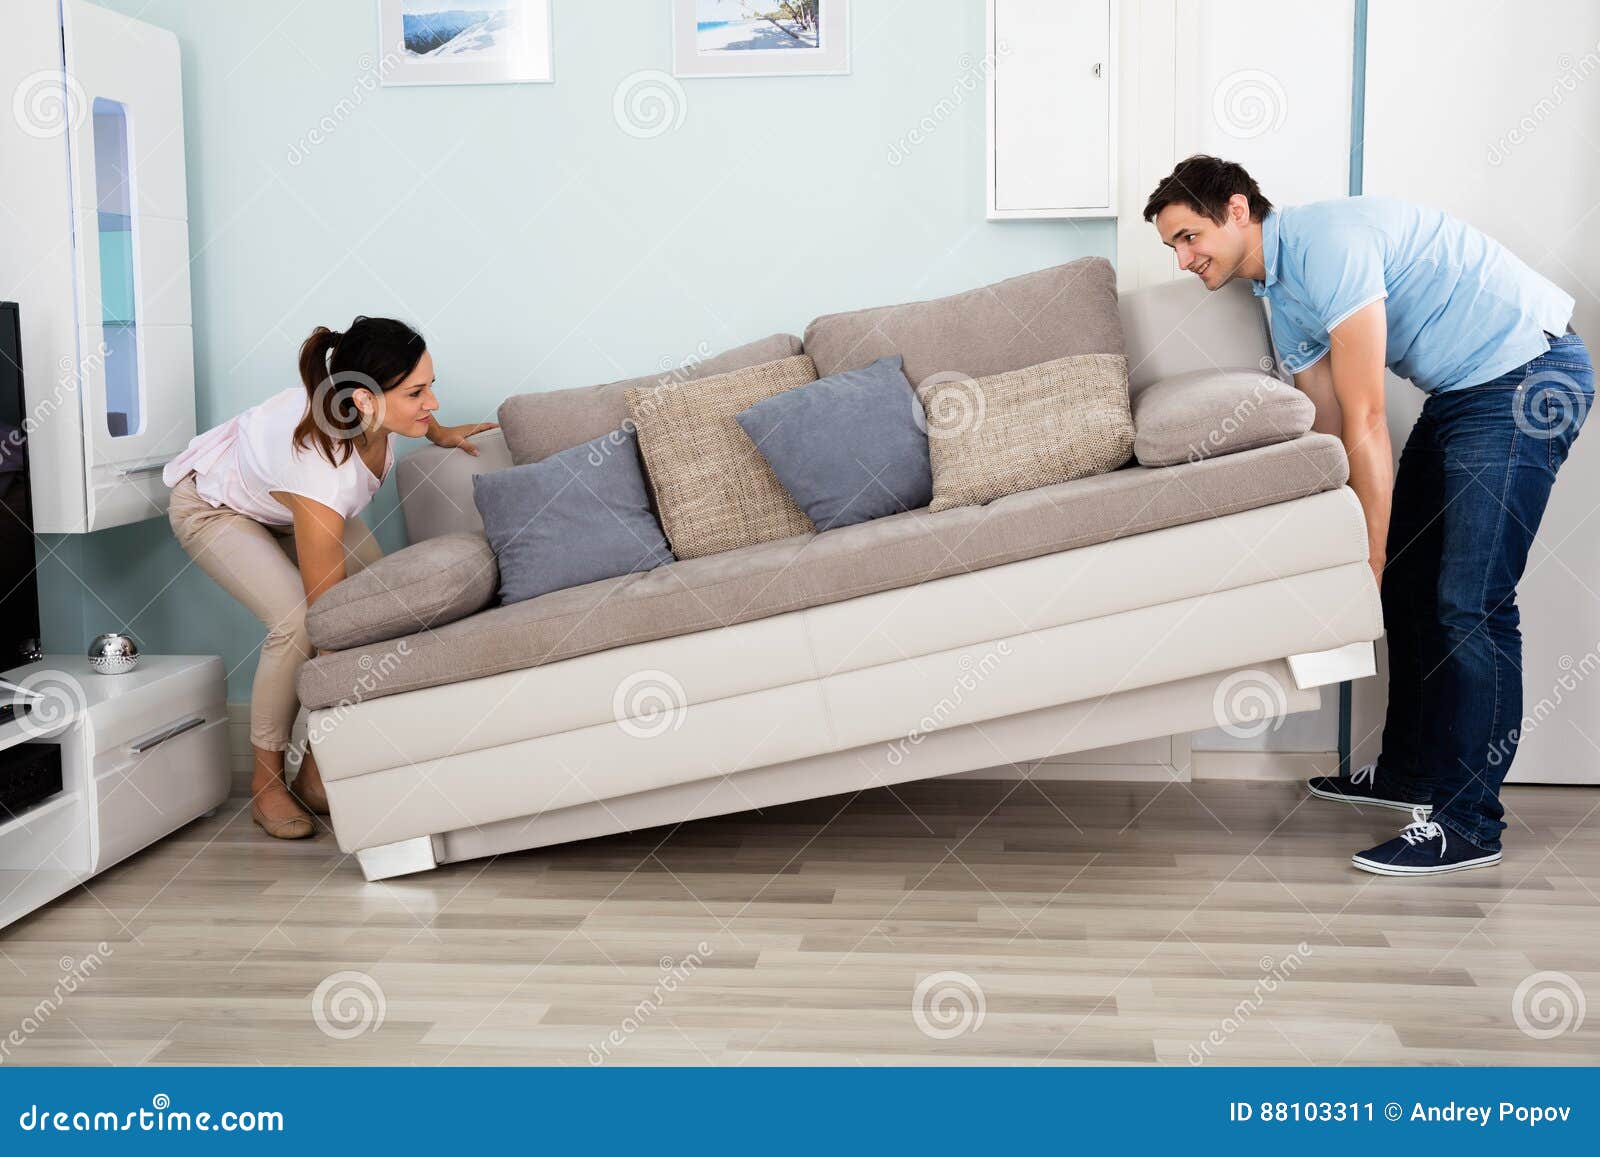 couple placing sofa in living room